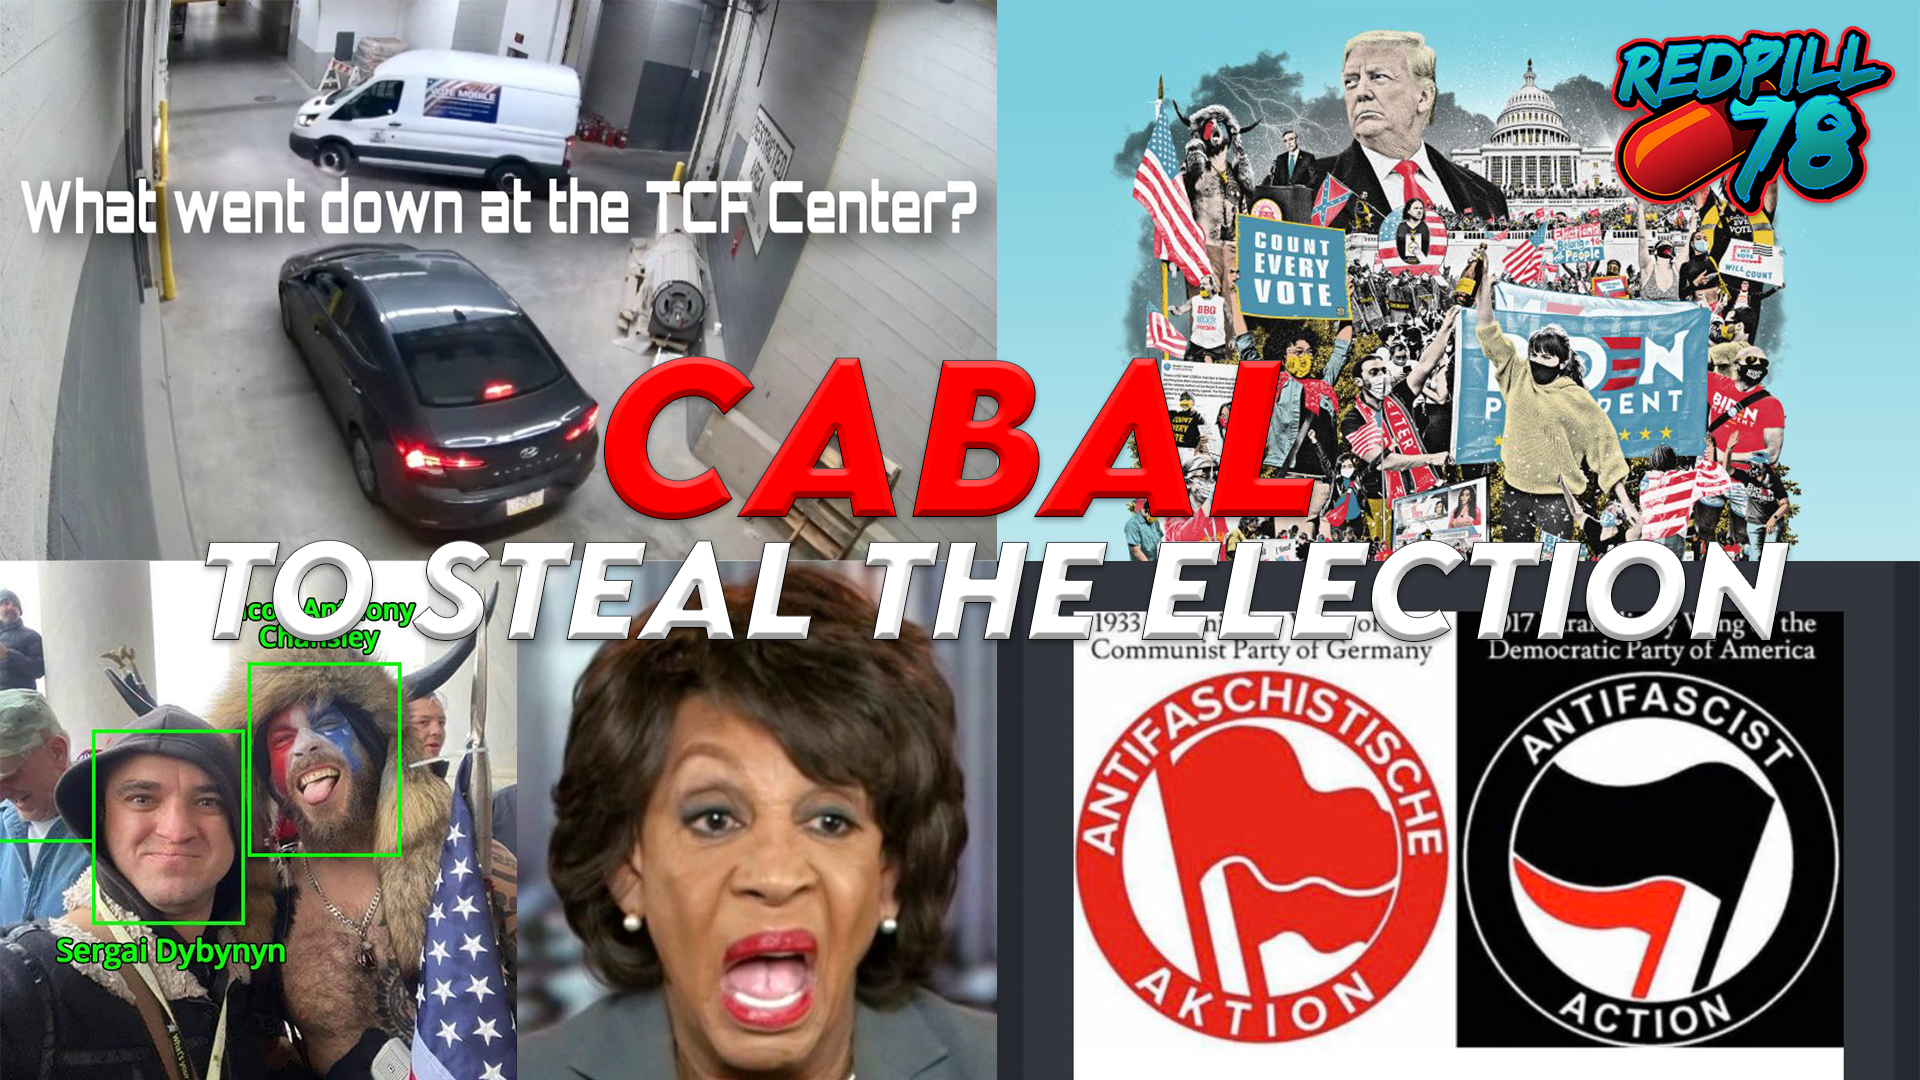 TIME MAGAZINE REVEALS “WELL FUNDED CABAL” THAT STOLE THE ELECTION